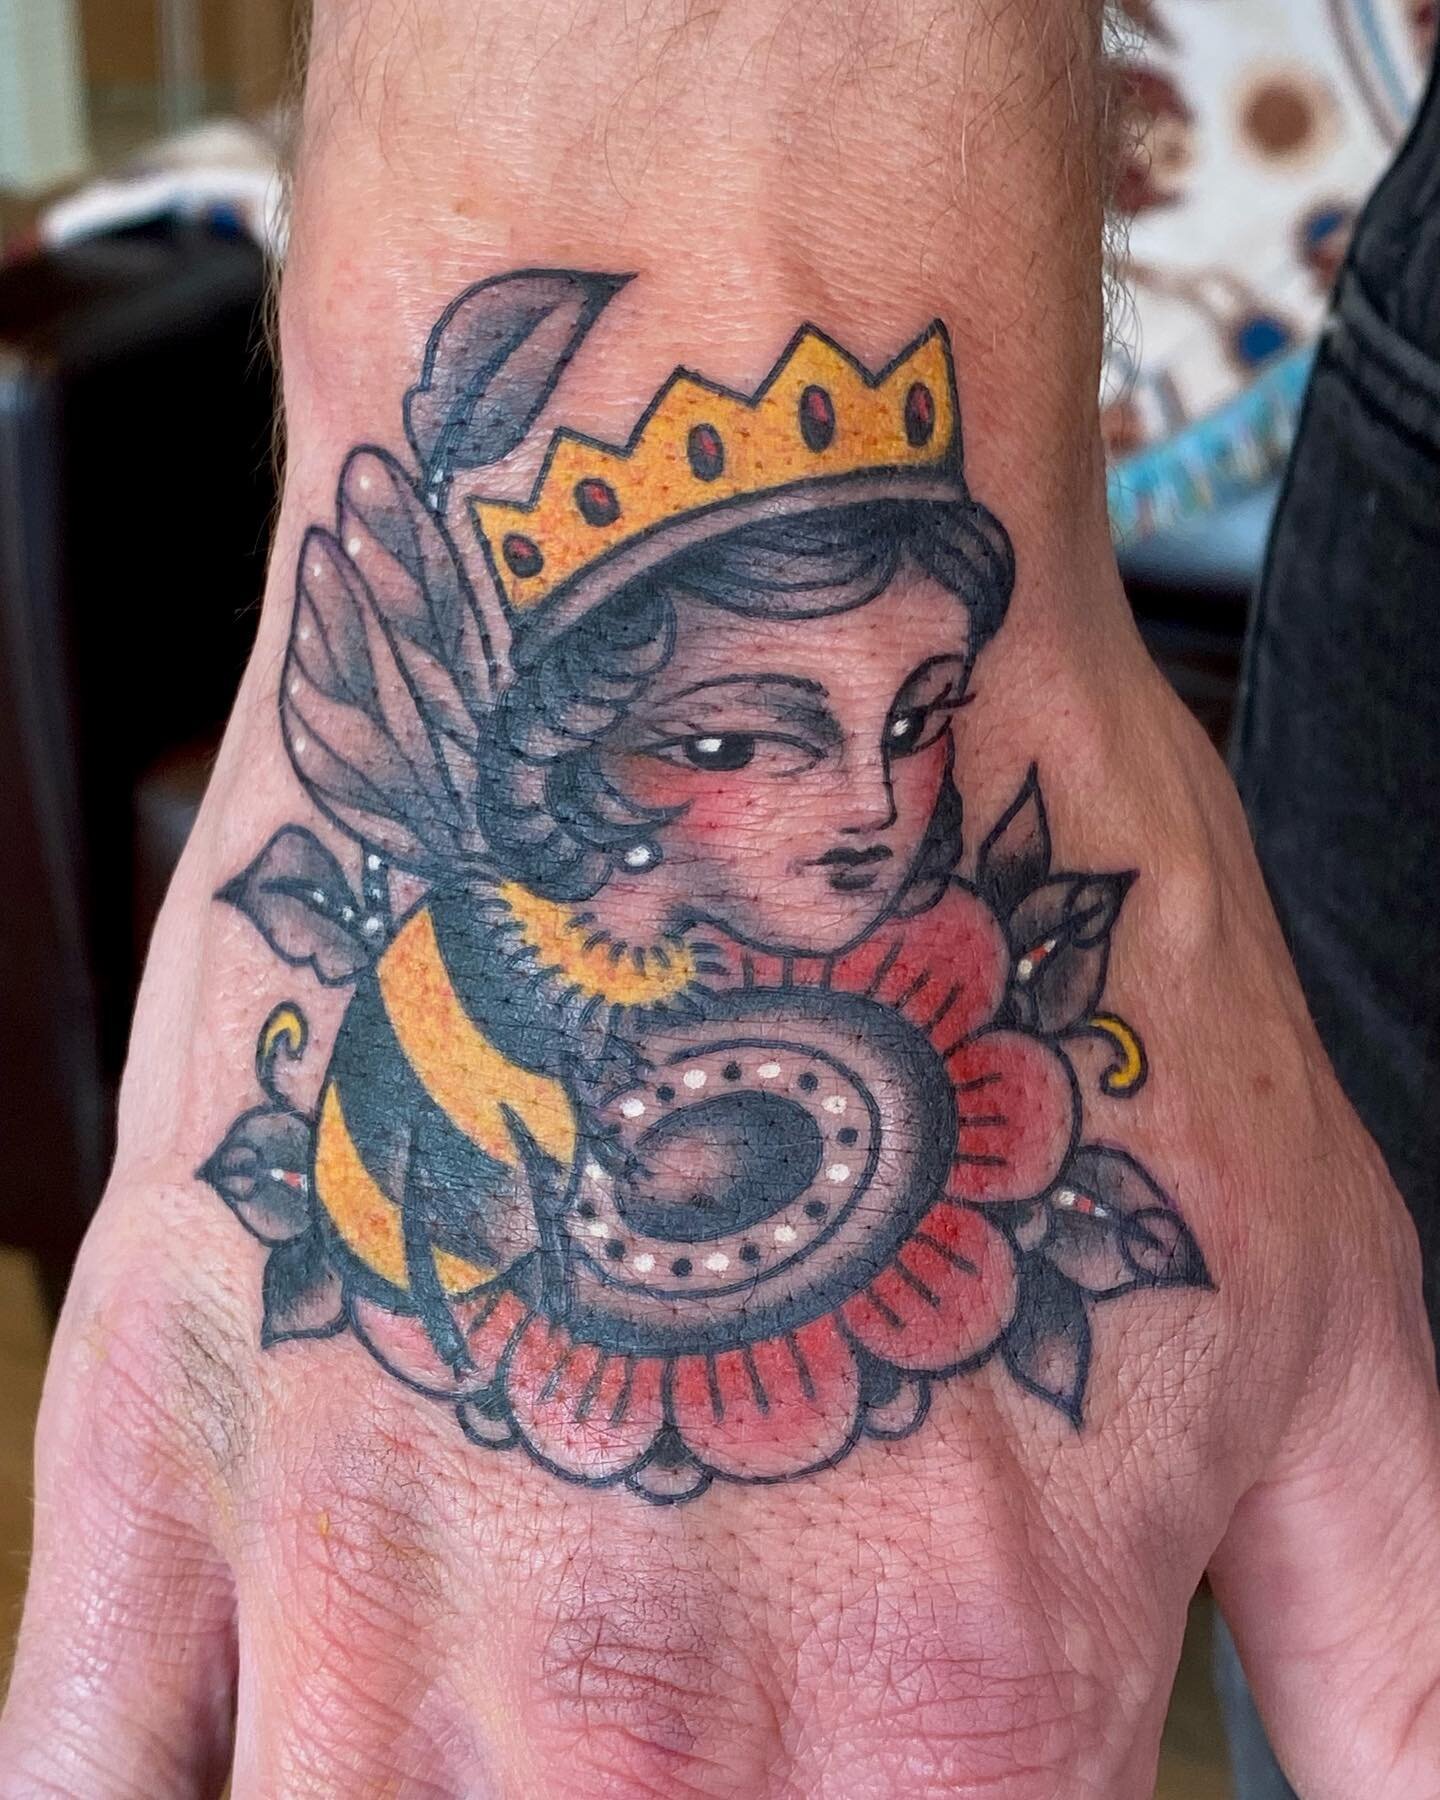 Queen Bee 🐝 thank you Chris!!! Done at Black Rabbit Studio in Langley

Find me next Sunday the 25th for Flash Day at @36thstreettattoo, first come first serve, I&rsquo;ll be doing only flash designs from my book or off the walls 🤩🤩🤩